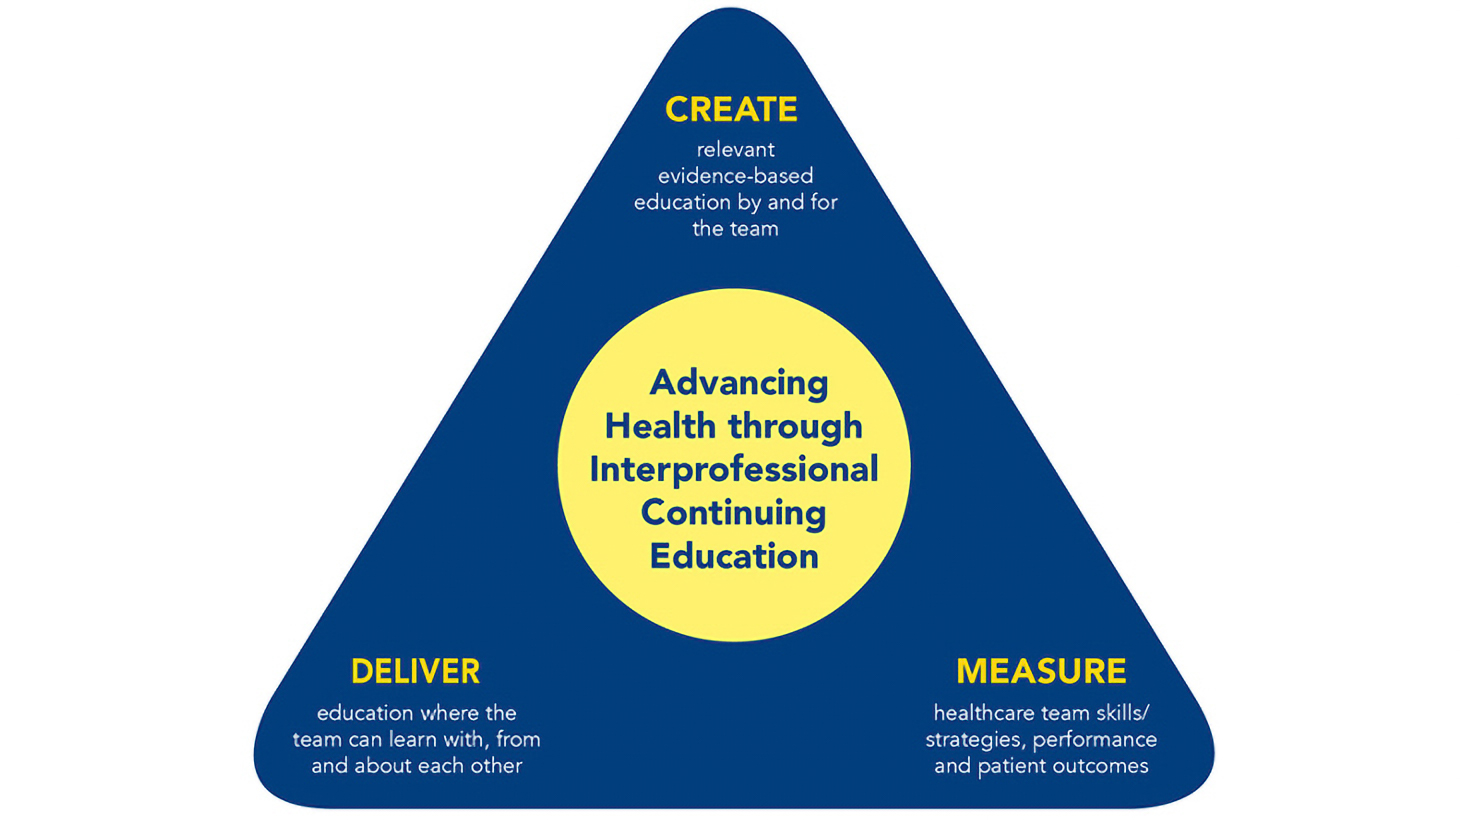 Infographic illustrating the 3 tenets of MedStar Health's Interprofessional Continuing Education Program - Create, Deliver and Measure.